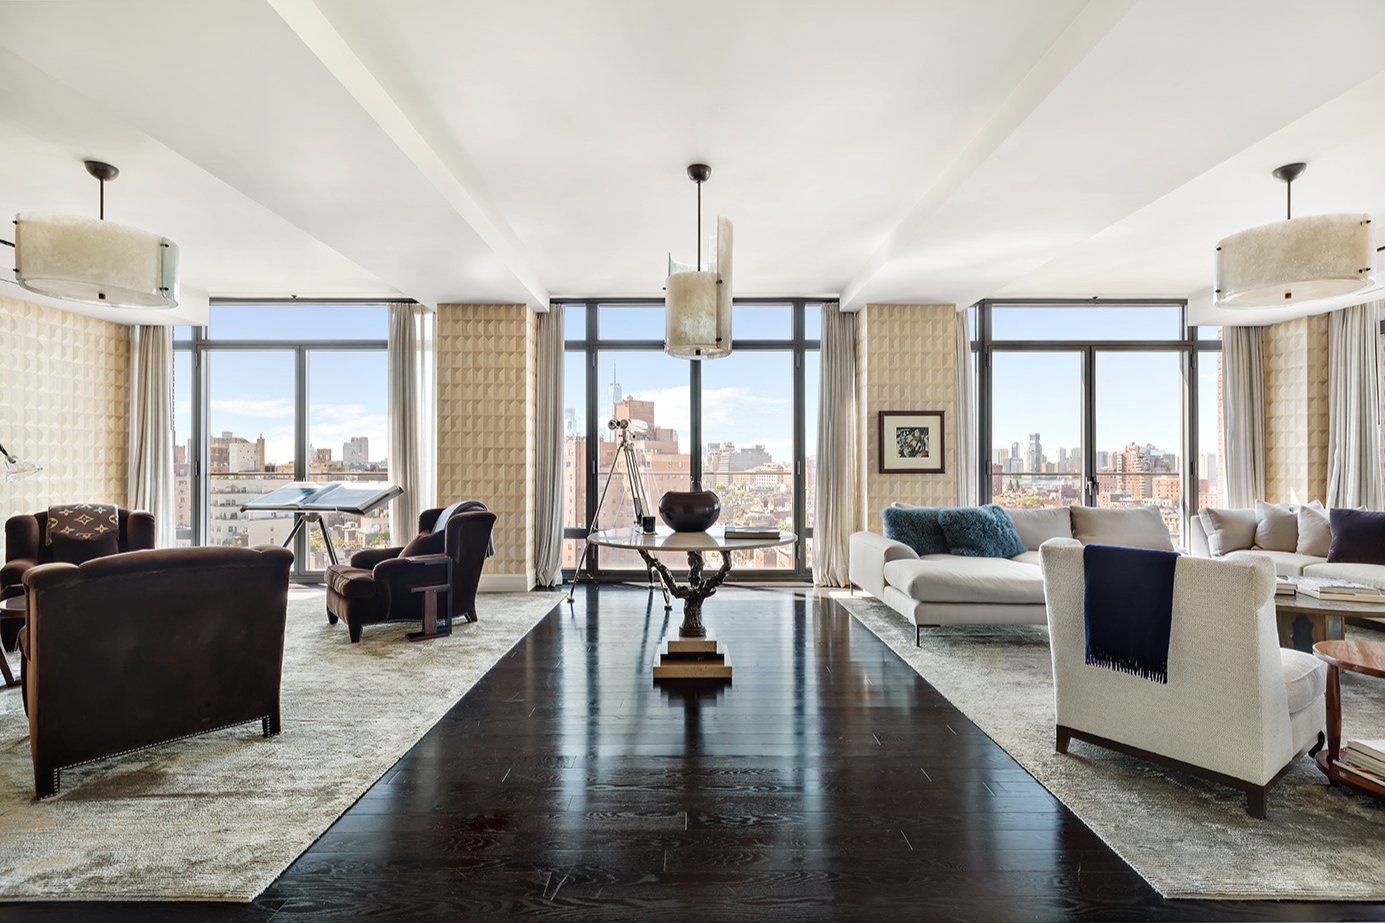 Condo formerly owner by Bon Jovi features panoramic views of lower Manhattan